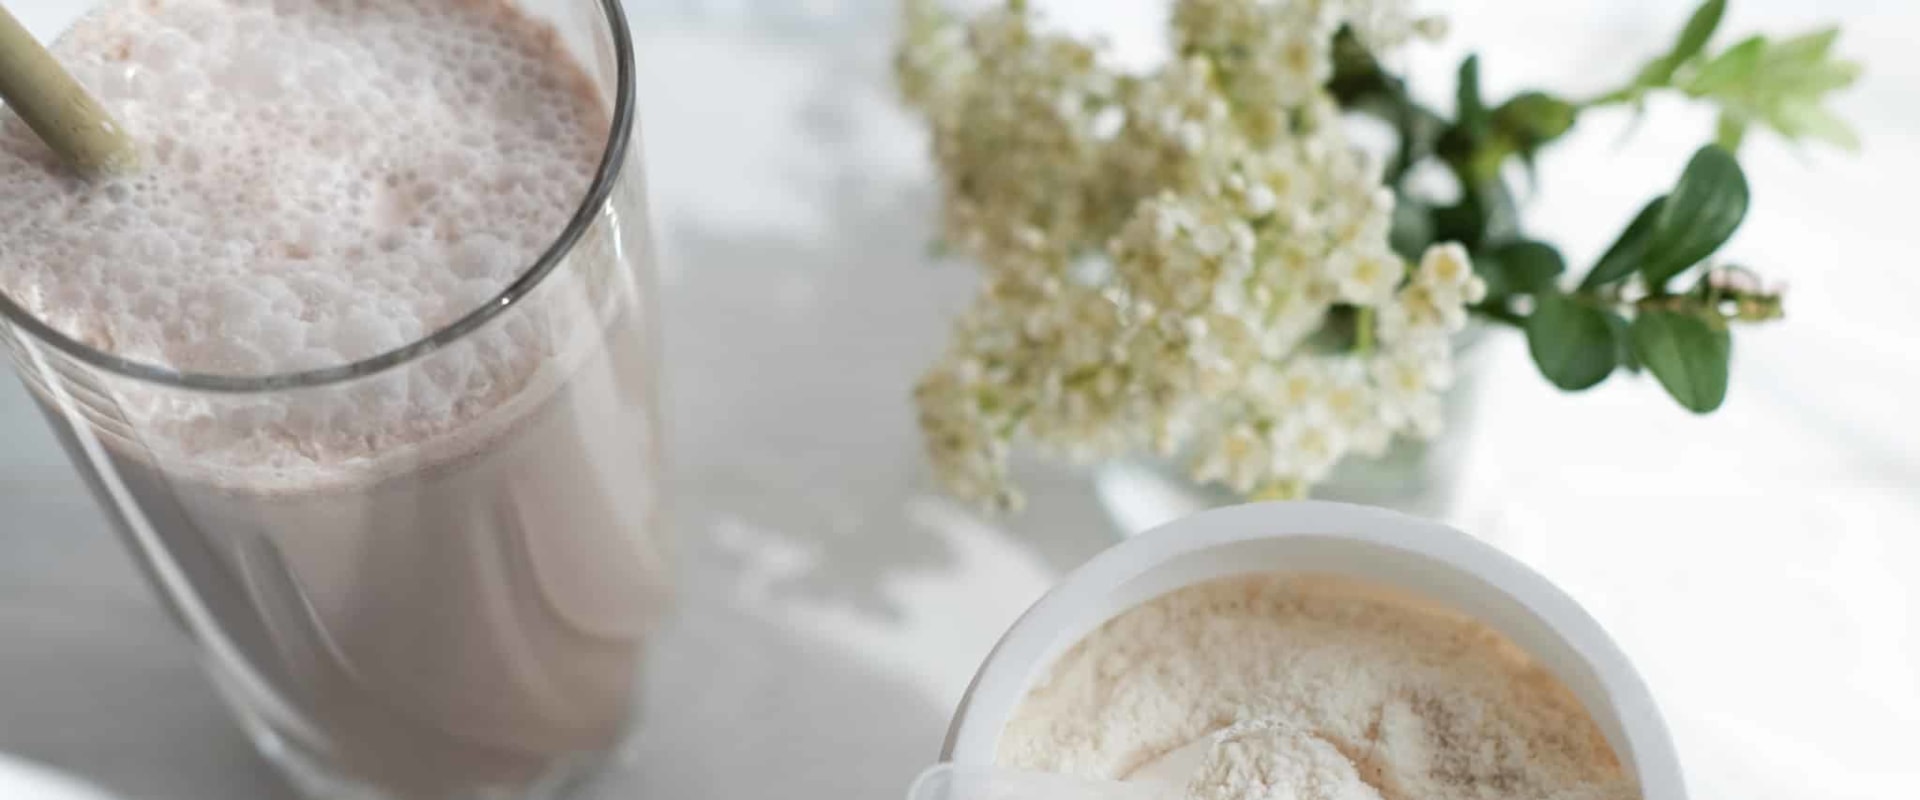 Can I Take Whey Protein If I'm Pregnant or Breastfeeding? - An Expert's Perspective